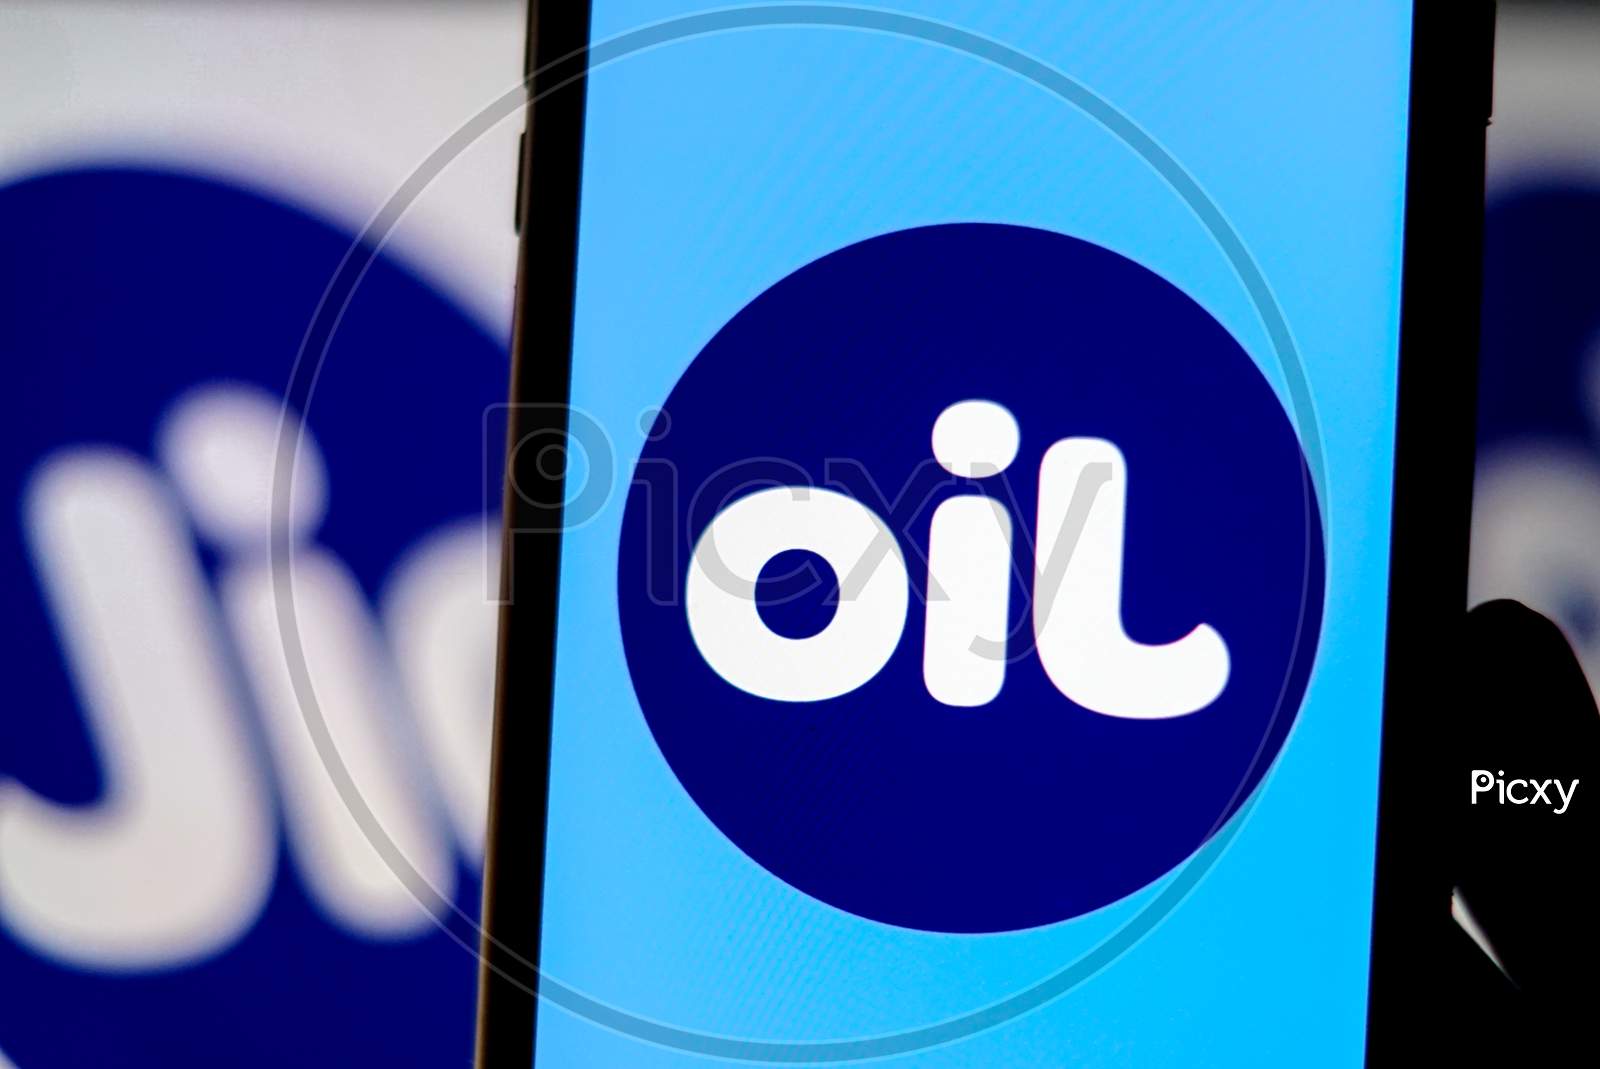 Flipped Jio Logo as OIL in a Smartphone with Jio Logo in the Background